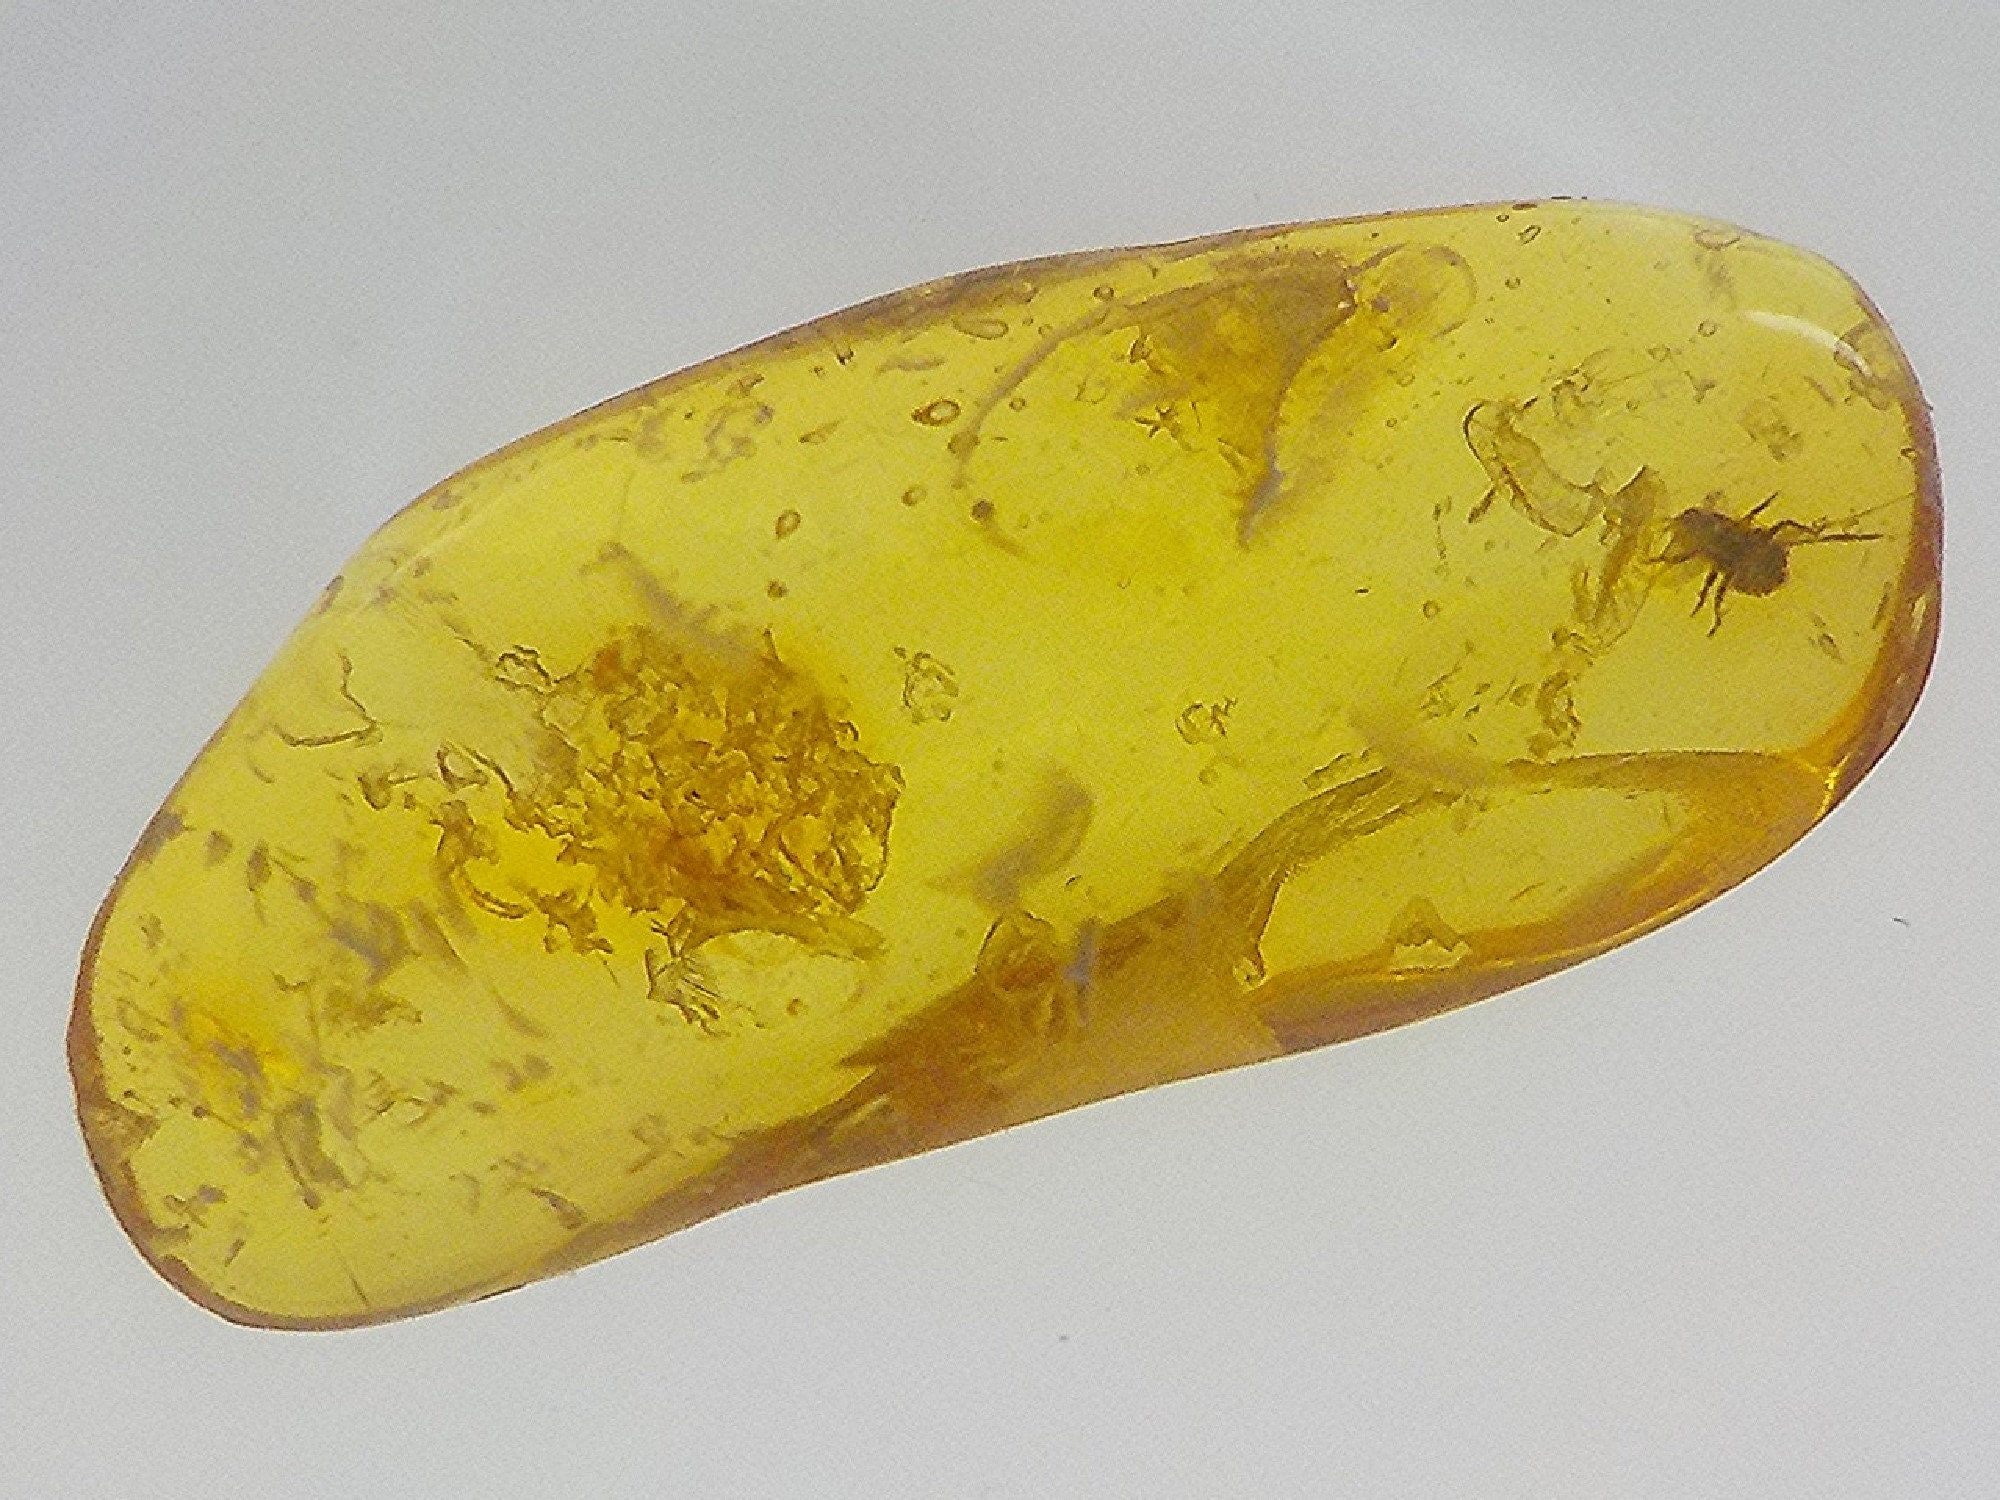 Genuine Baltic Amber Stone. Bugs in Amber Aphid Nymph. | Etsy